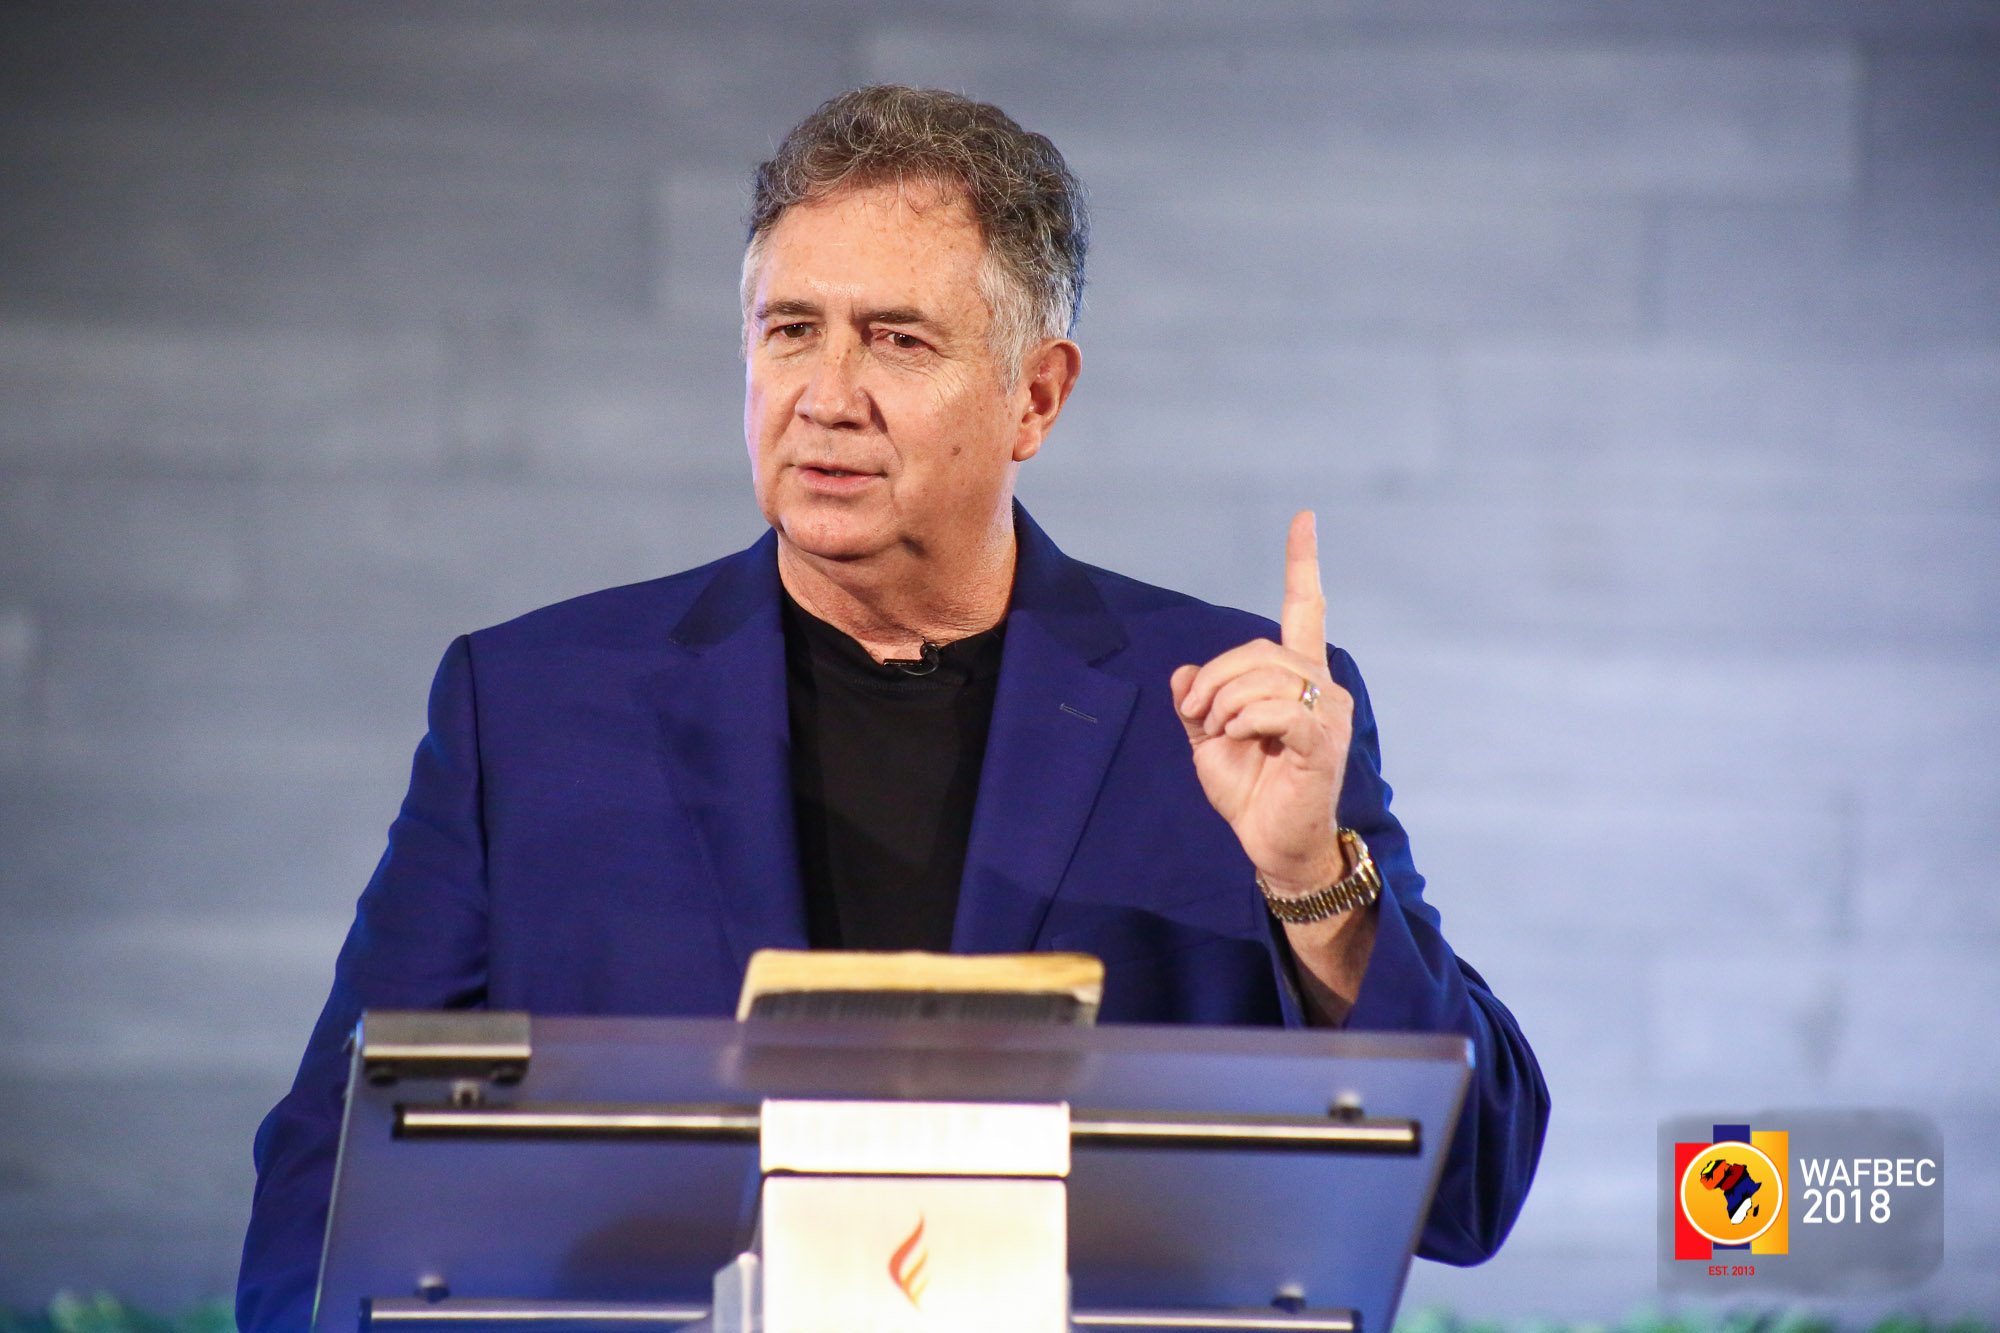 WAFBEC 2018 – Day 2 (Morning Session 1) with Rev. Mark Hankins